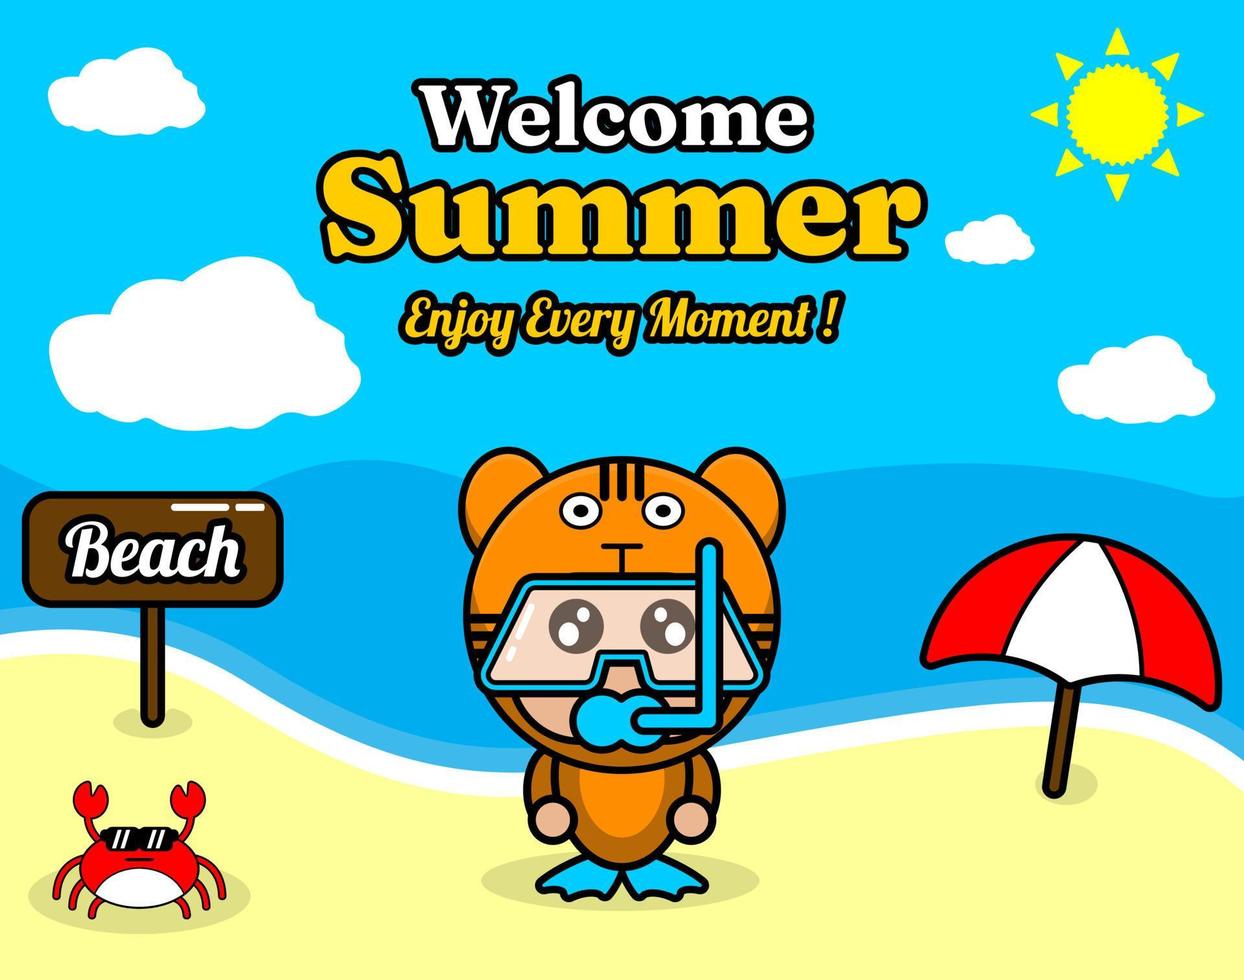 summer beach and sand background design with text enjoy every moment and summer element board says beach, crab and umbrella, with tiger animal mascot costume wearing senorkel vector